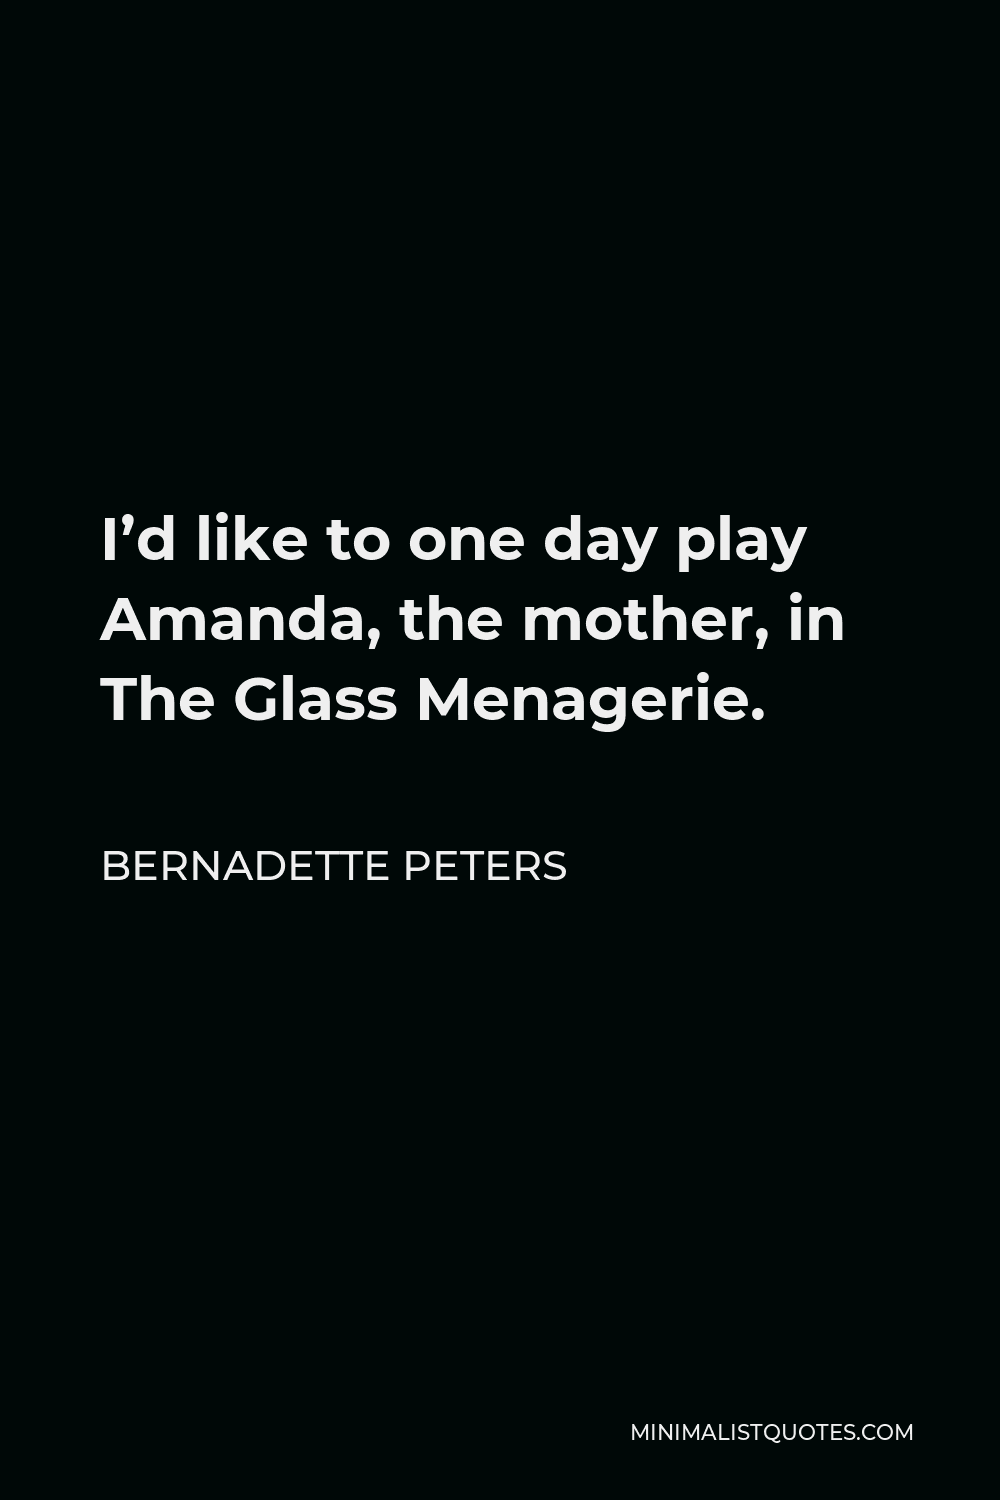 Bernadette Peters Quote - I’d like to one day play Amanda, the mother, in The Glass Menagerie.